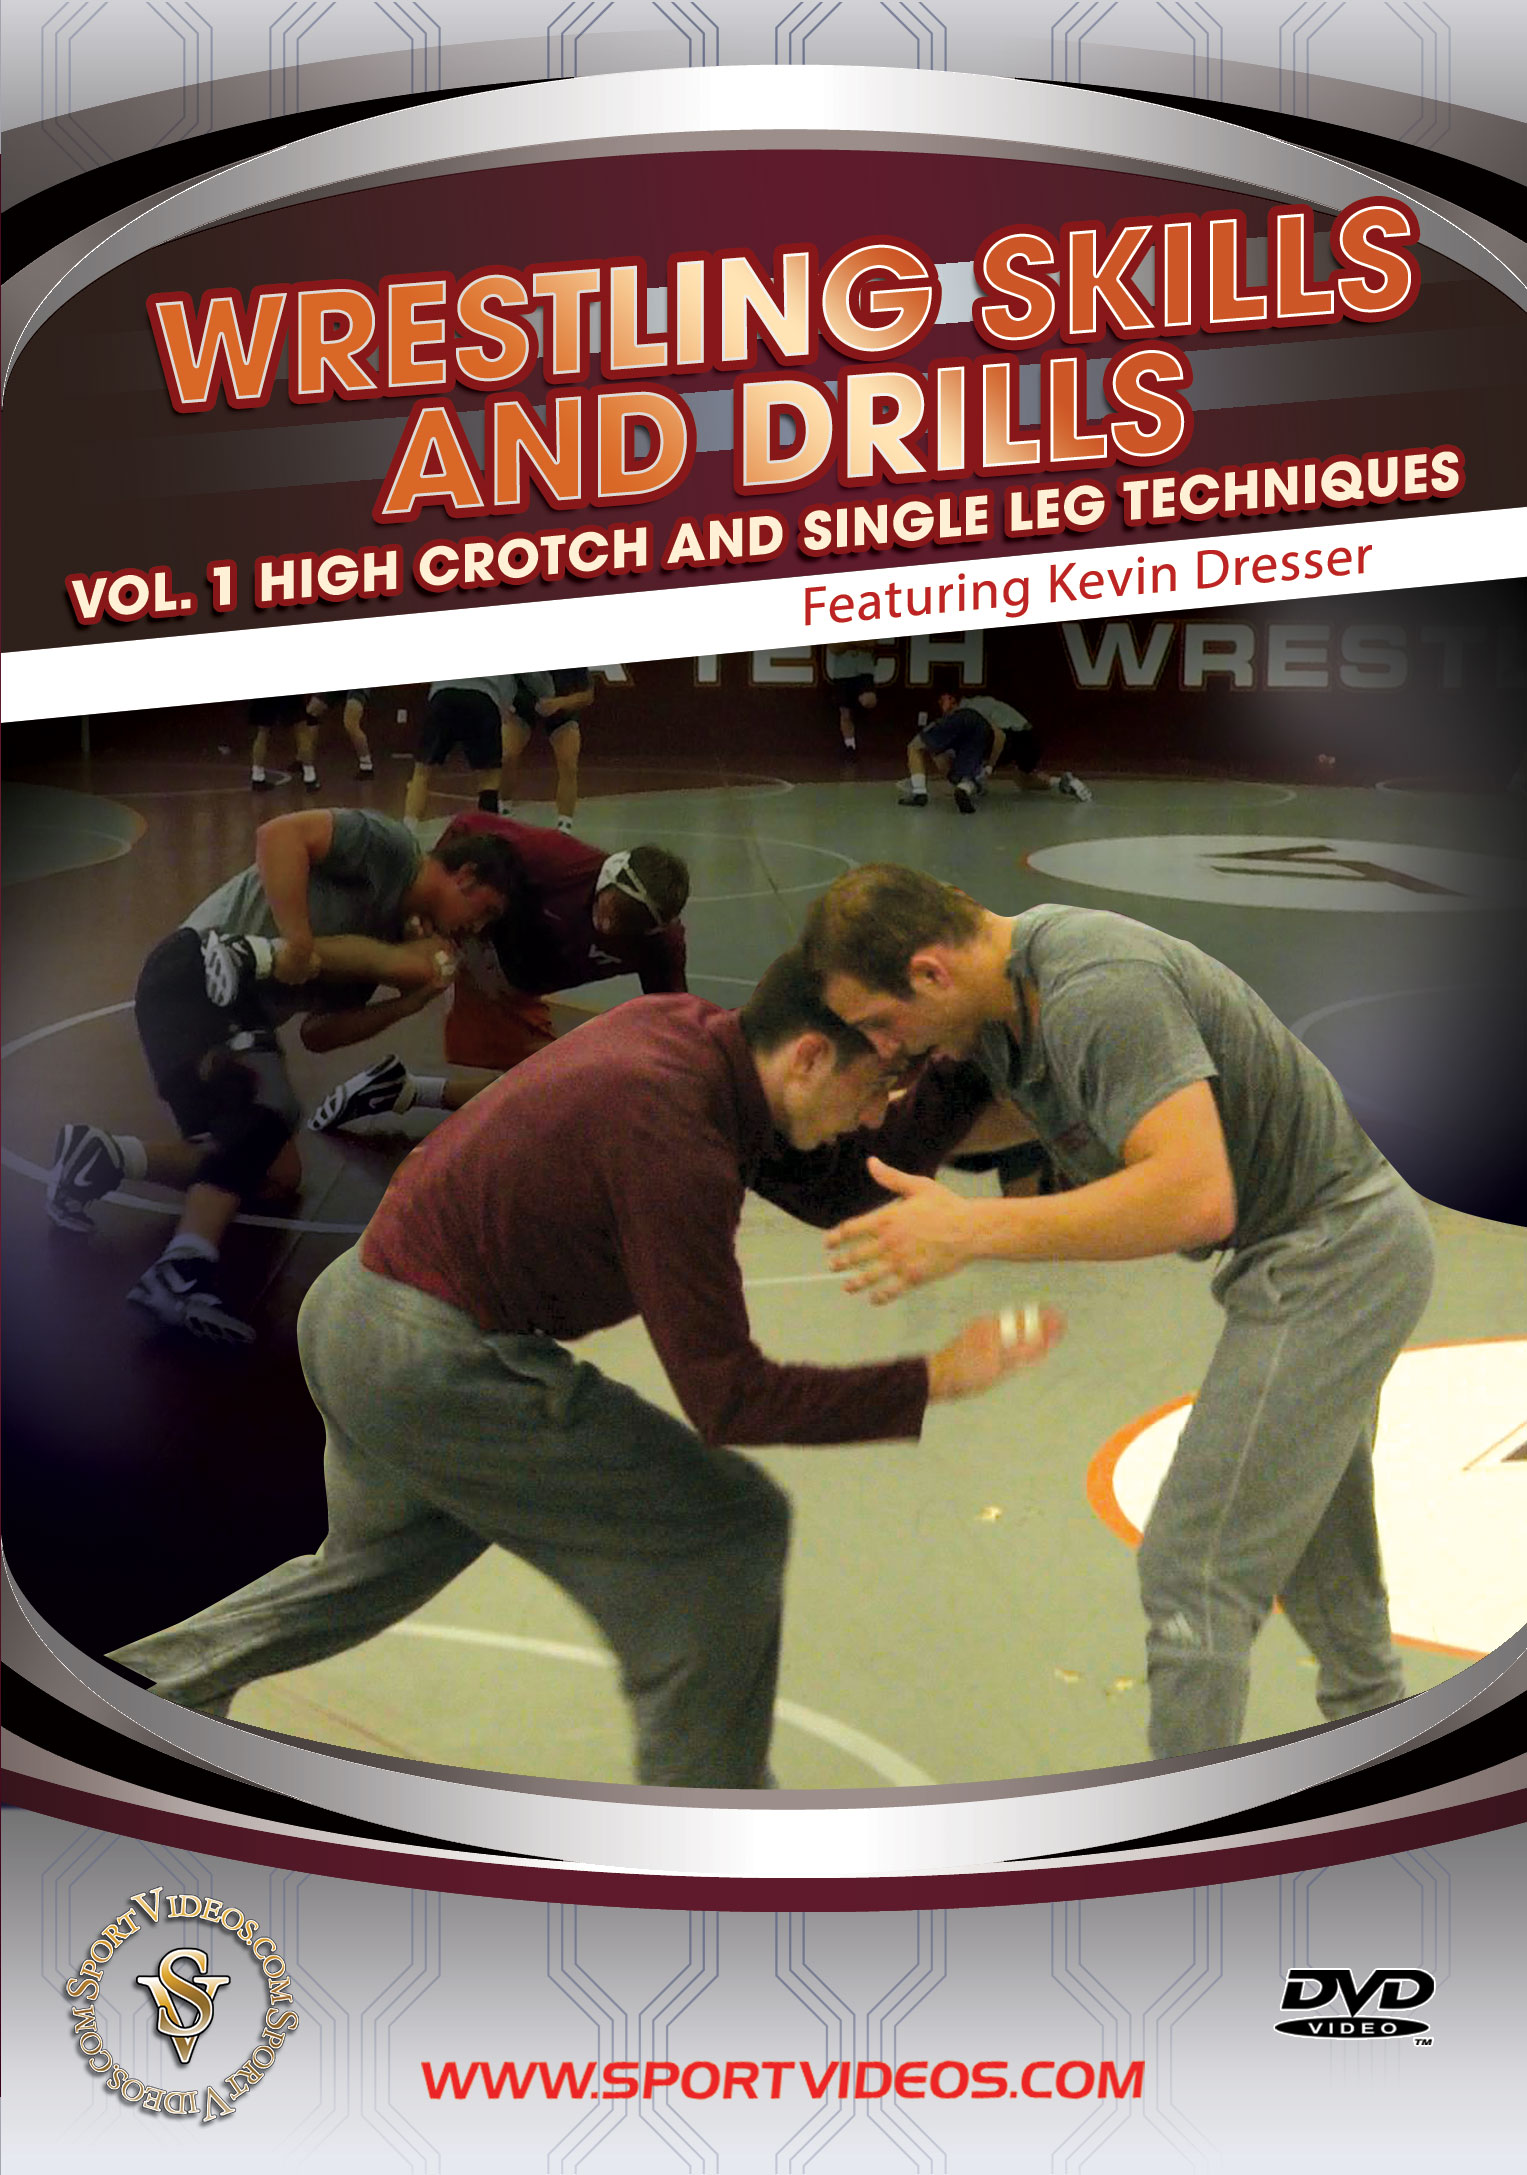 Wrestling Skills and Drills - Vol. 1 High Crotch and Single Leg Techniques Video Download 